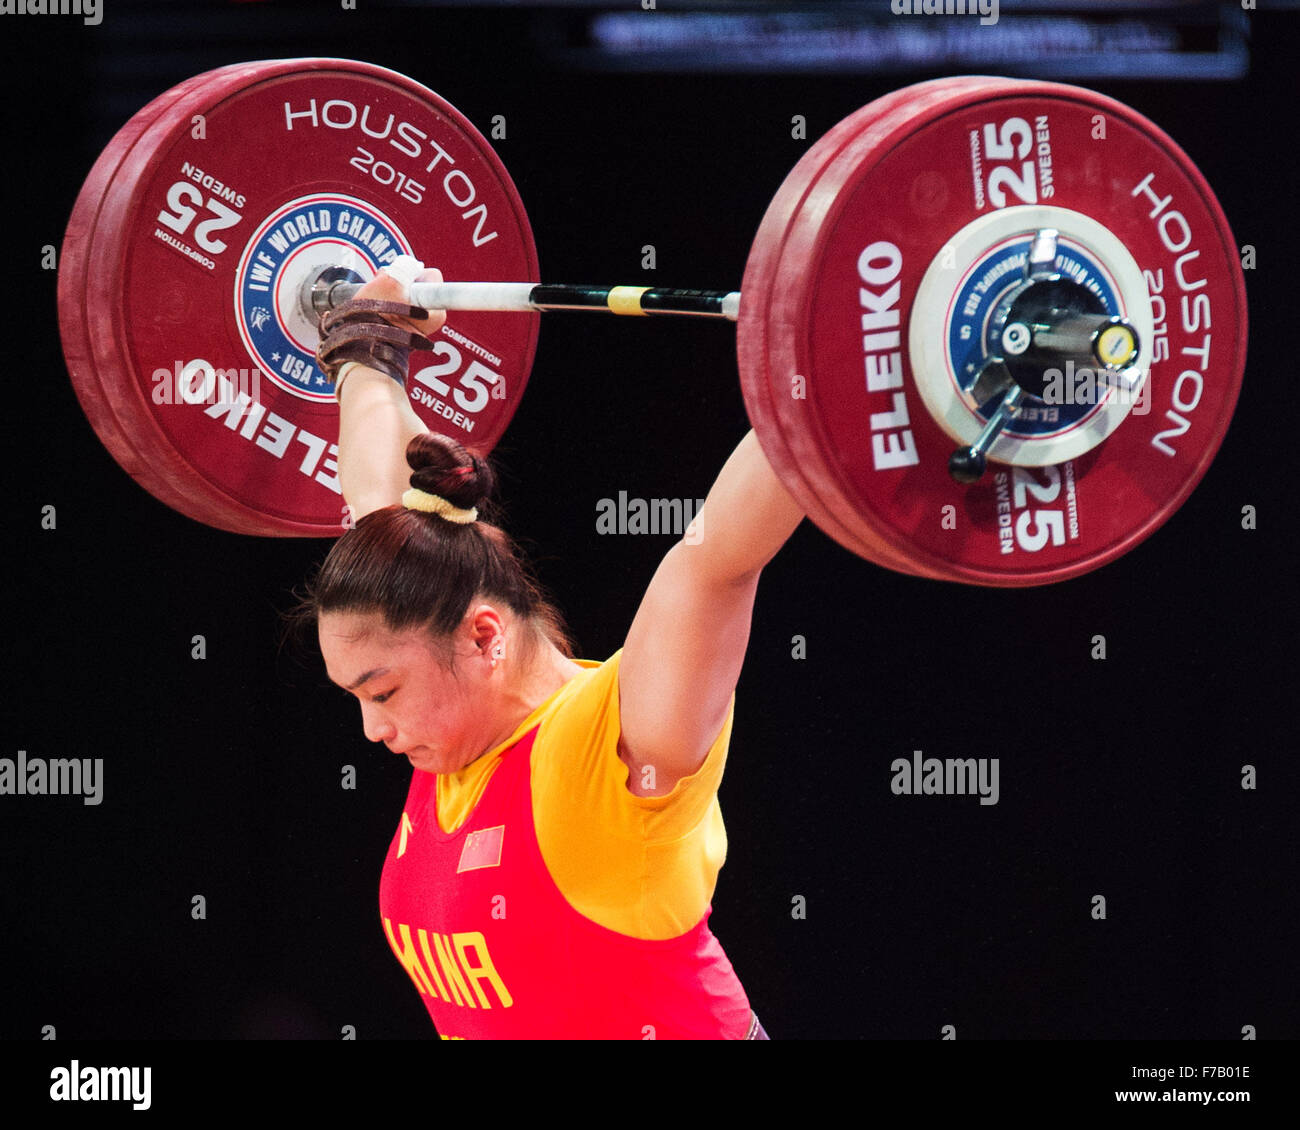 Houston, Texas, USA. November 26, 2015: Kang Yue of China wins the gold medal in the snatch in the Women's 75kg at the World Weightlifting Championships in Houston, Texas. Credit:  Brent Clark/Alamy Live News Stock Photo